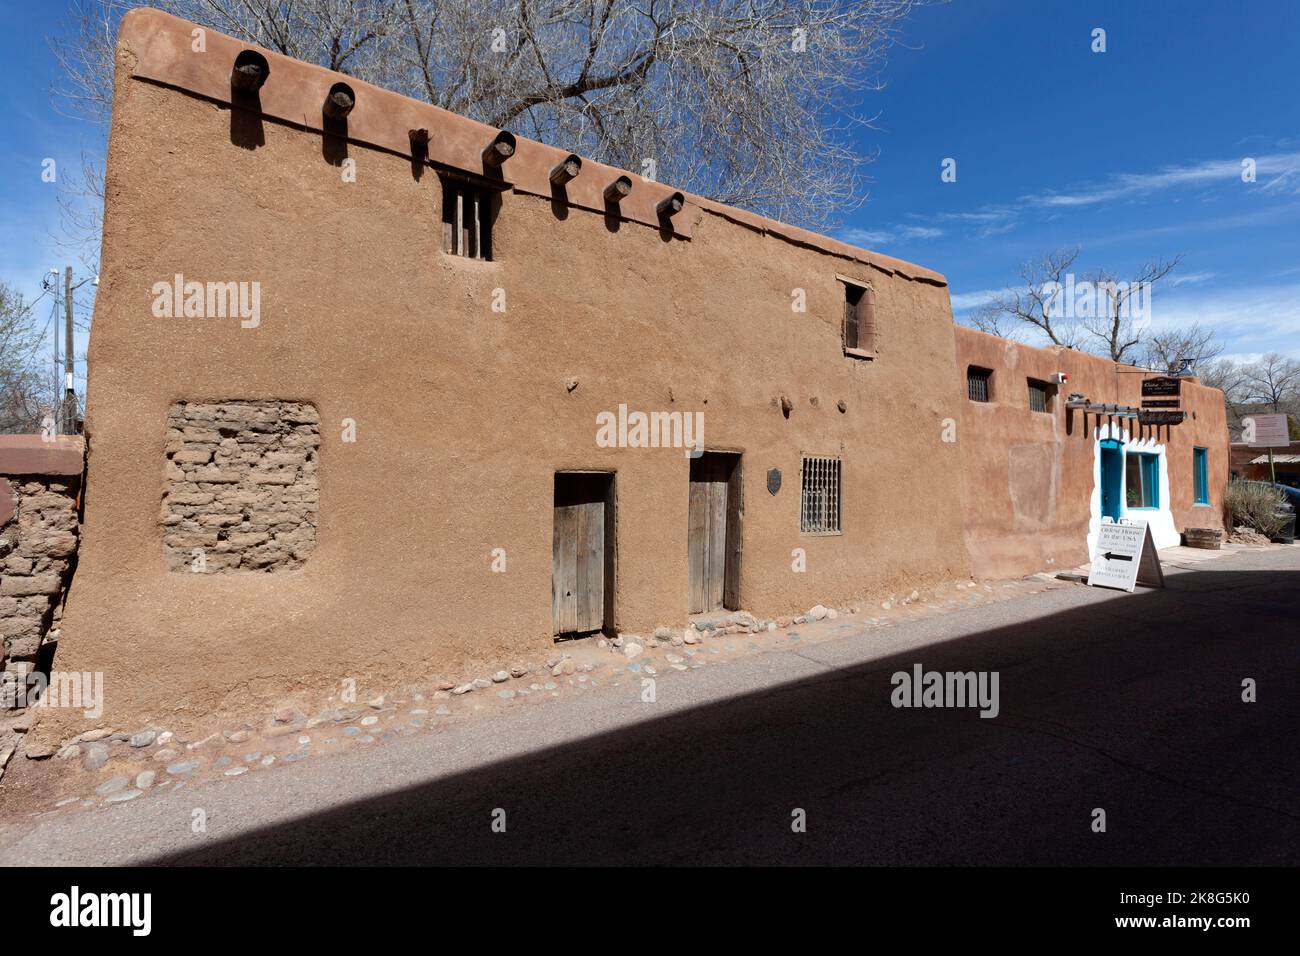 The adobe De Vargas Street House, often referred to as the Oldest House, is a historic building in Santa Fe, New Mexico.  The house is often said to b Stock Photo